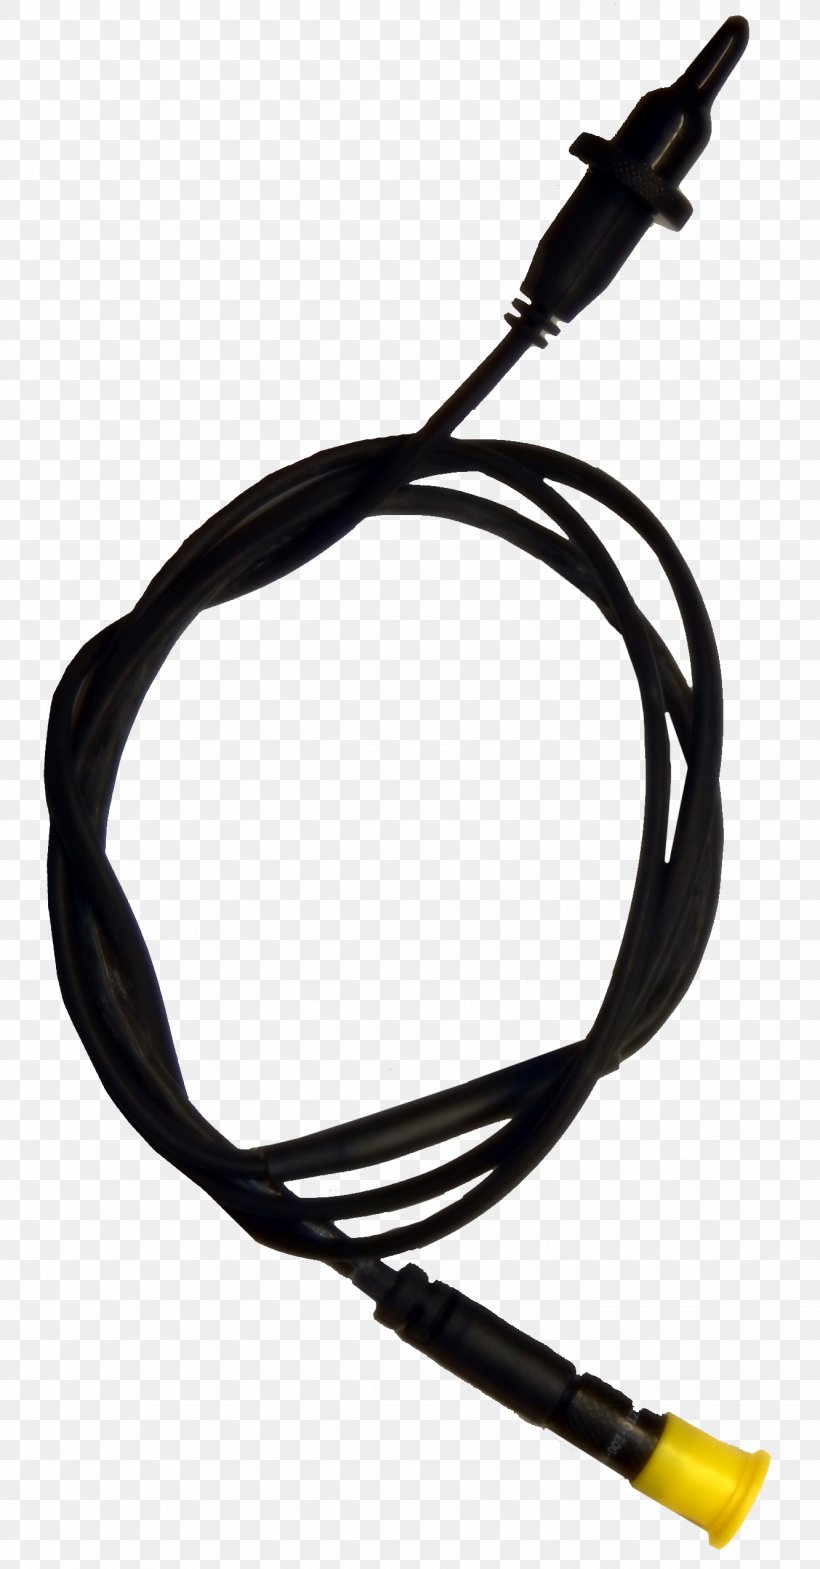 Data Transmission Electrical Cable, PNG, 1332x2550px, Data Transmission, Cable, Data, Data Transfer Cable, Electrical Cable Download Free